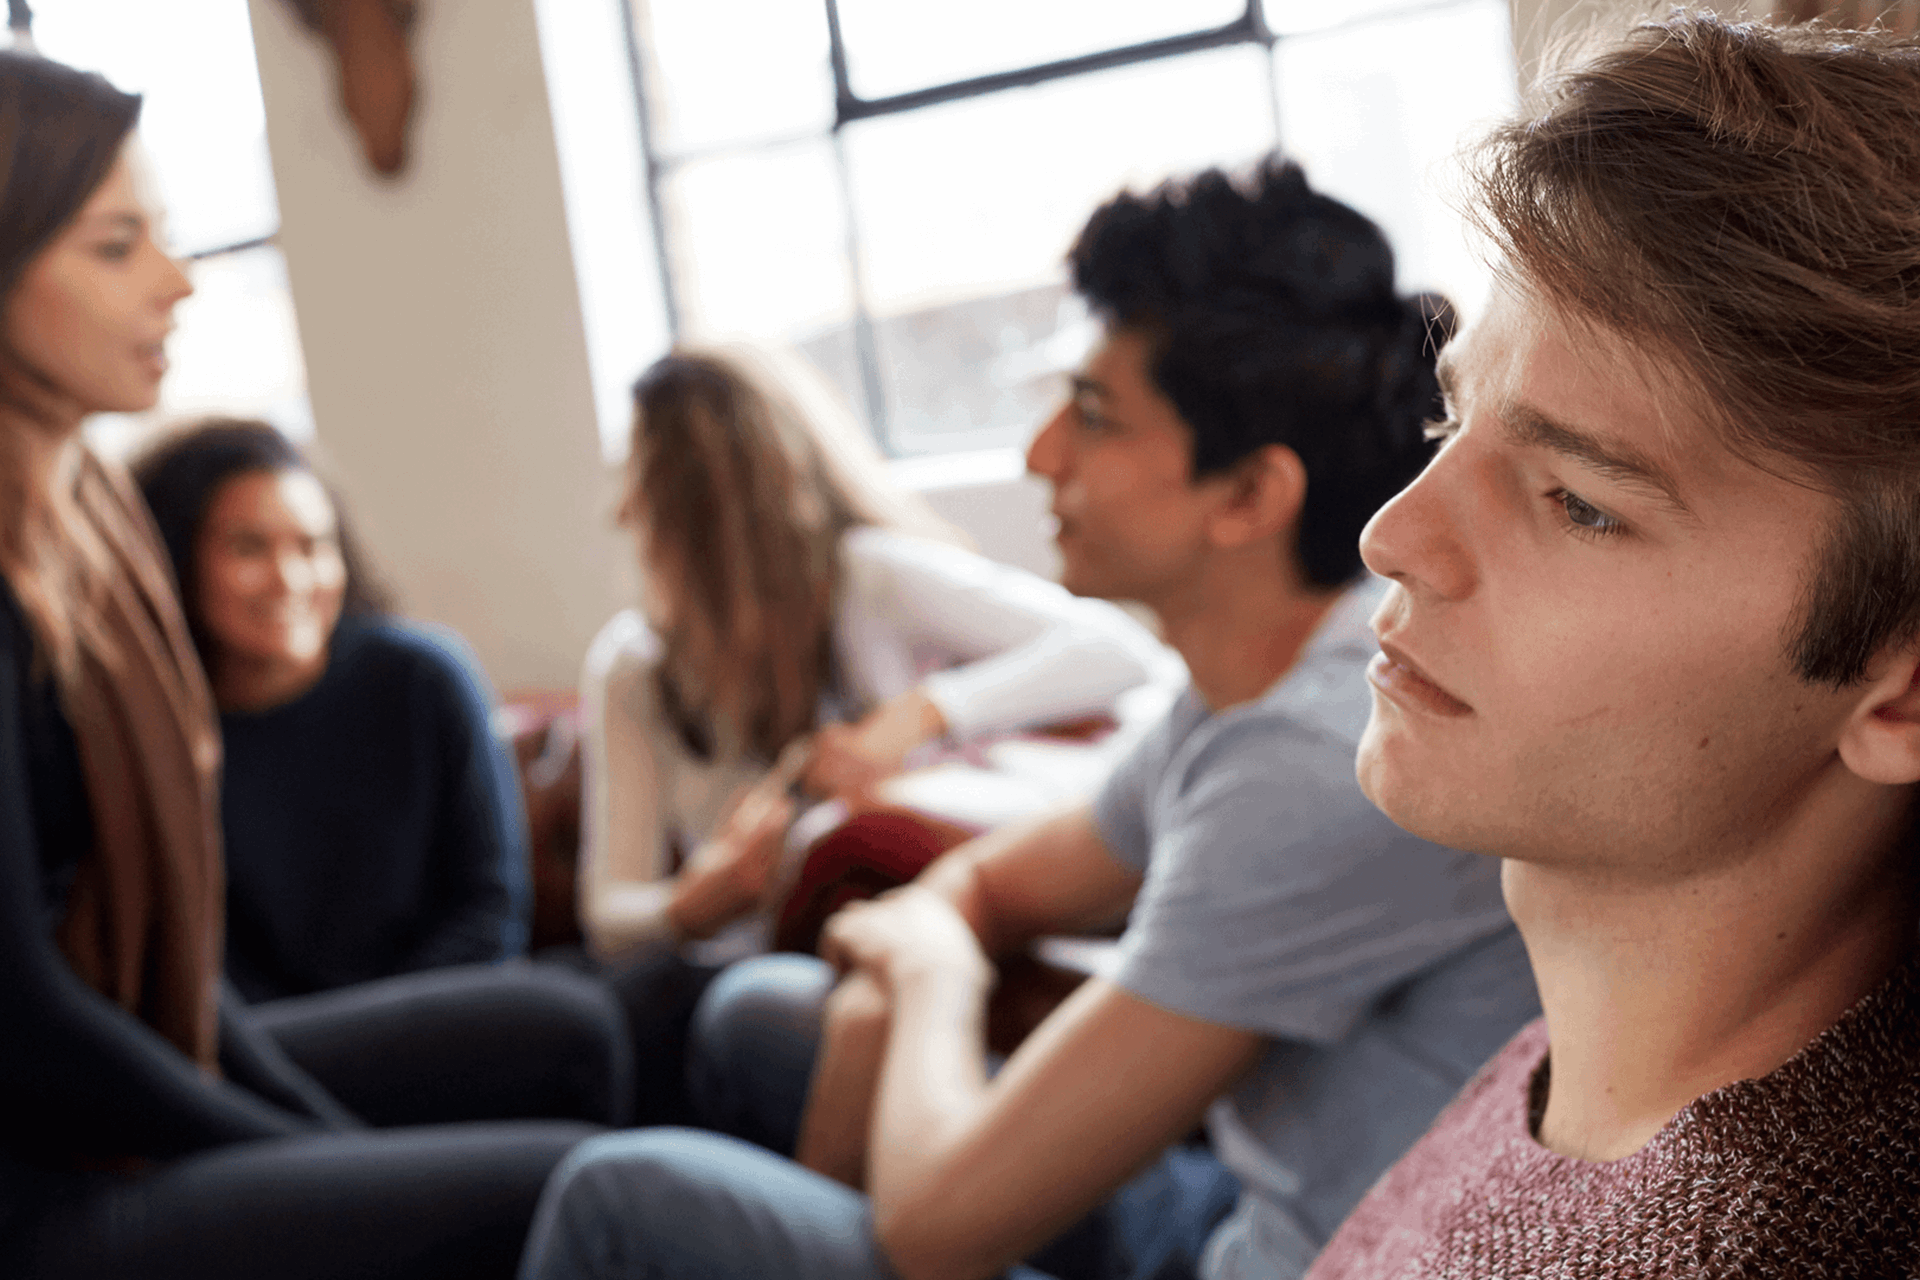 A young person lost in thought while sitting with their group of friends who are talking together.